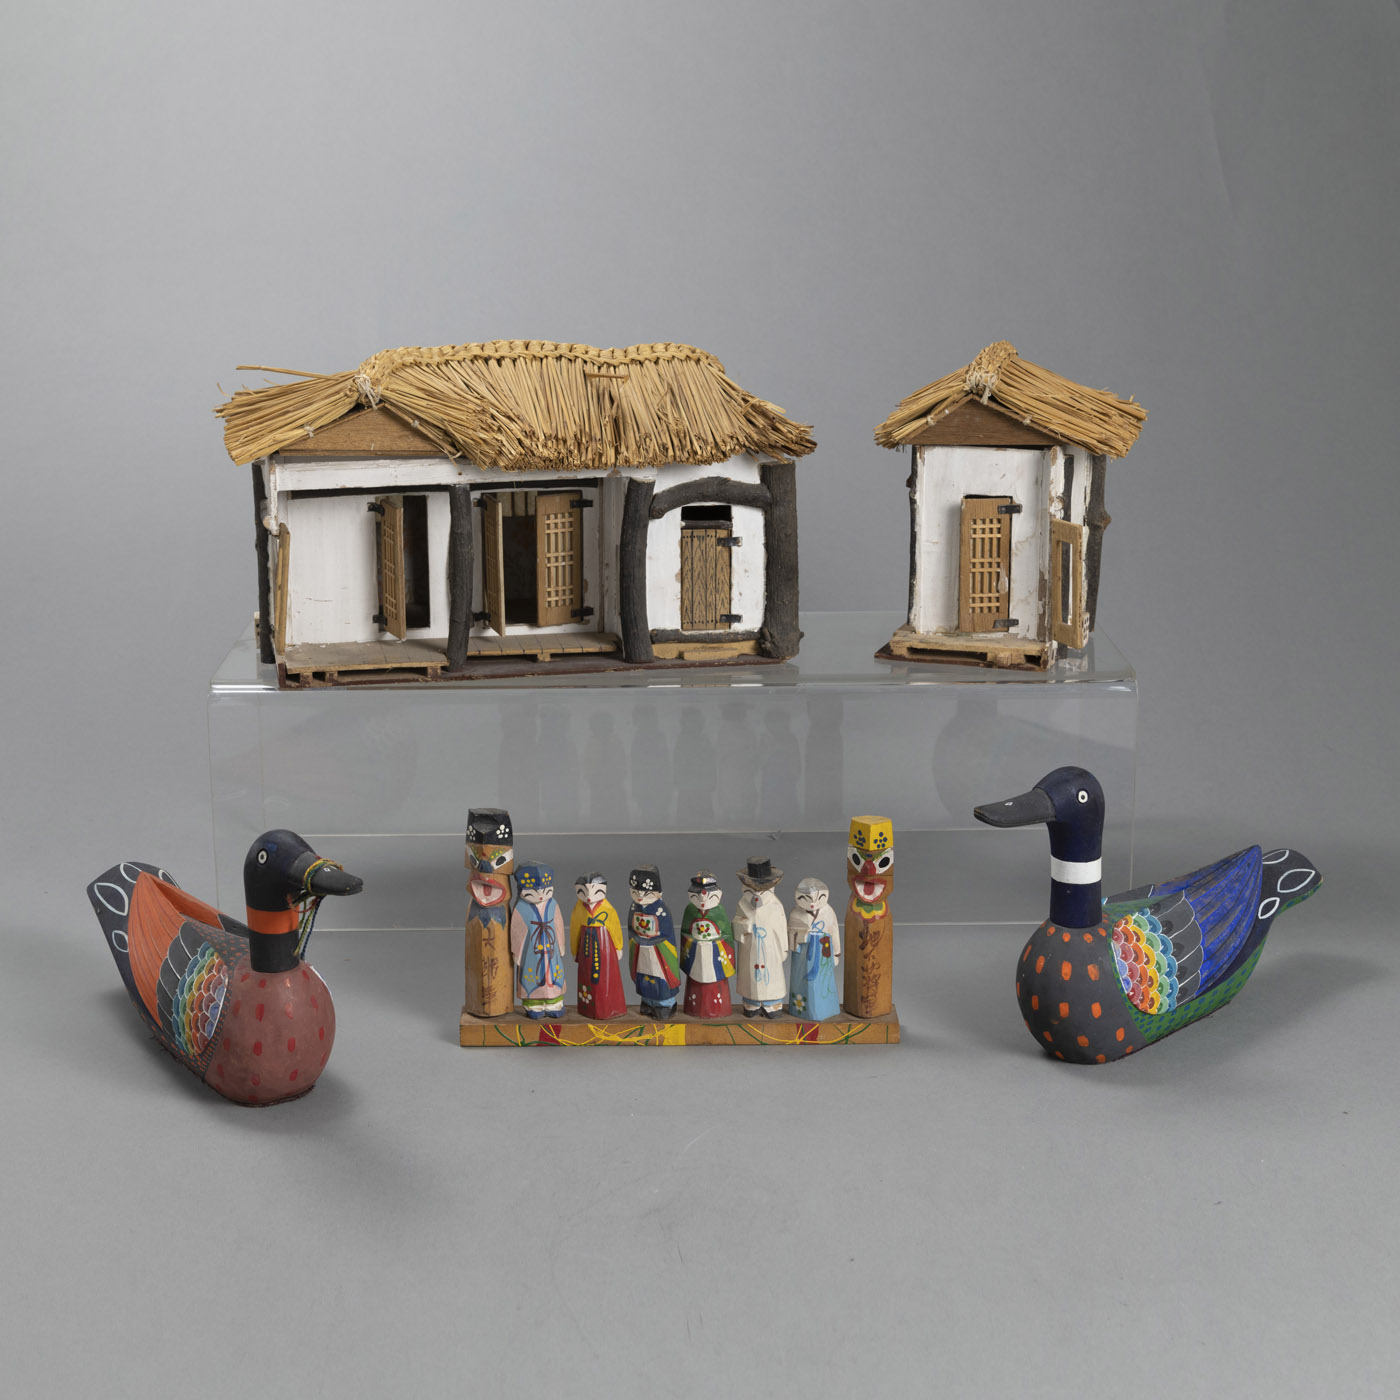 <b>A MODEL OF A YANGBAN HOUSE MADE OF DIFFERENT MATERIALS, A GROUP OF PAINTED WOODEN FIGURES AND A PAIR OF WEDDING DUCKS</b>